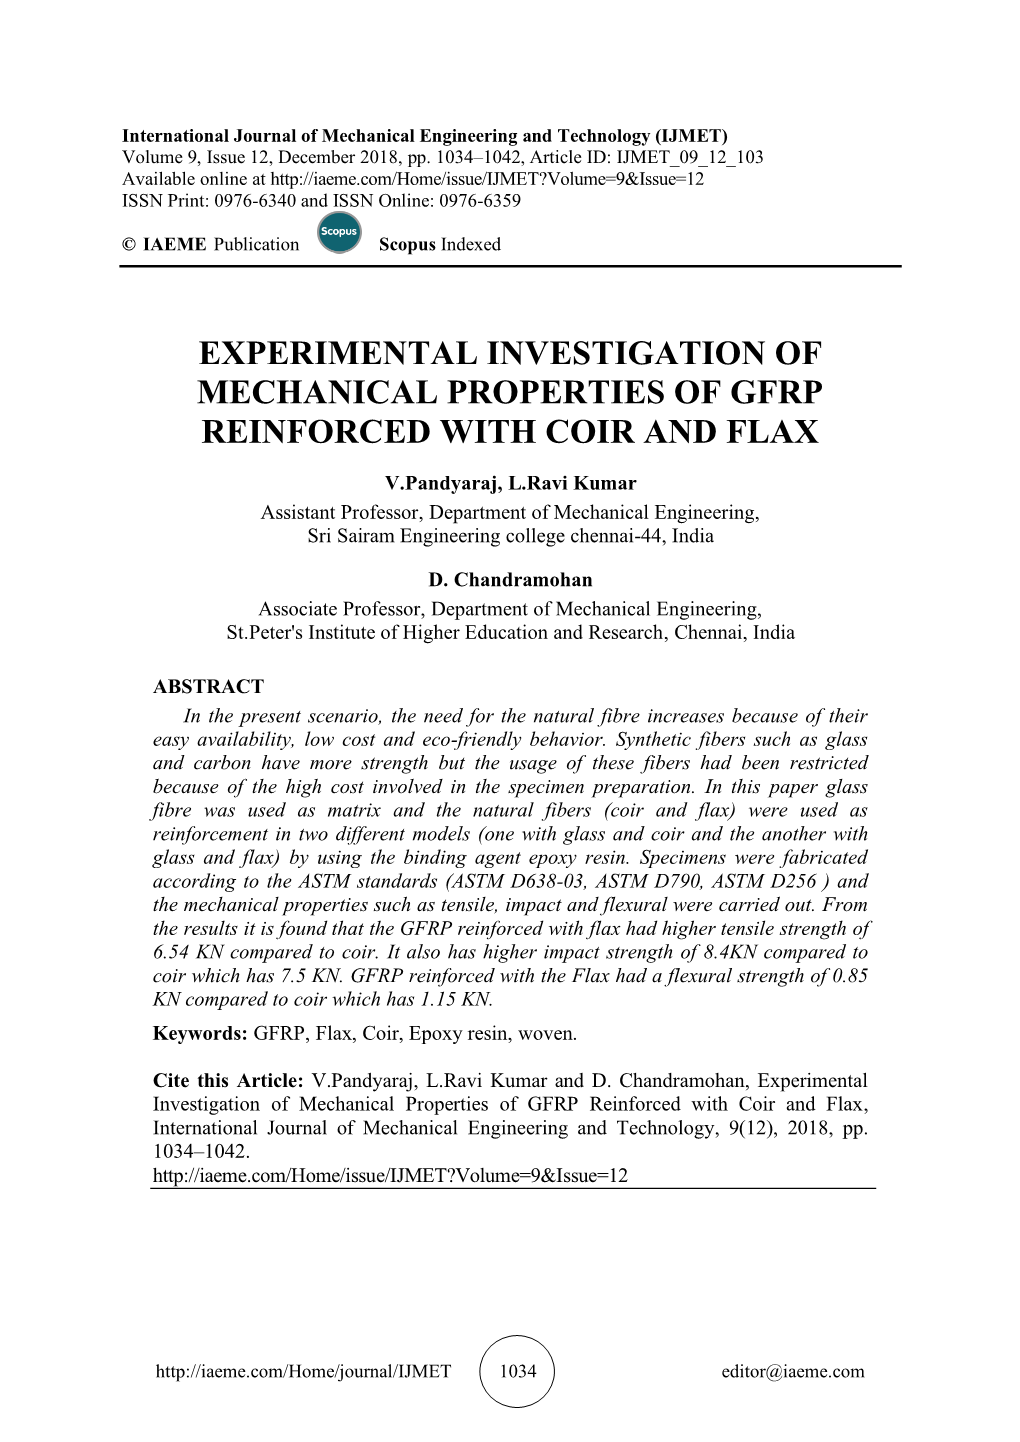 Experimental Investigation of Mechanical Properties of Gfrp Reinforced with Coir and Flax